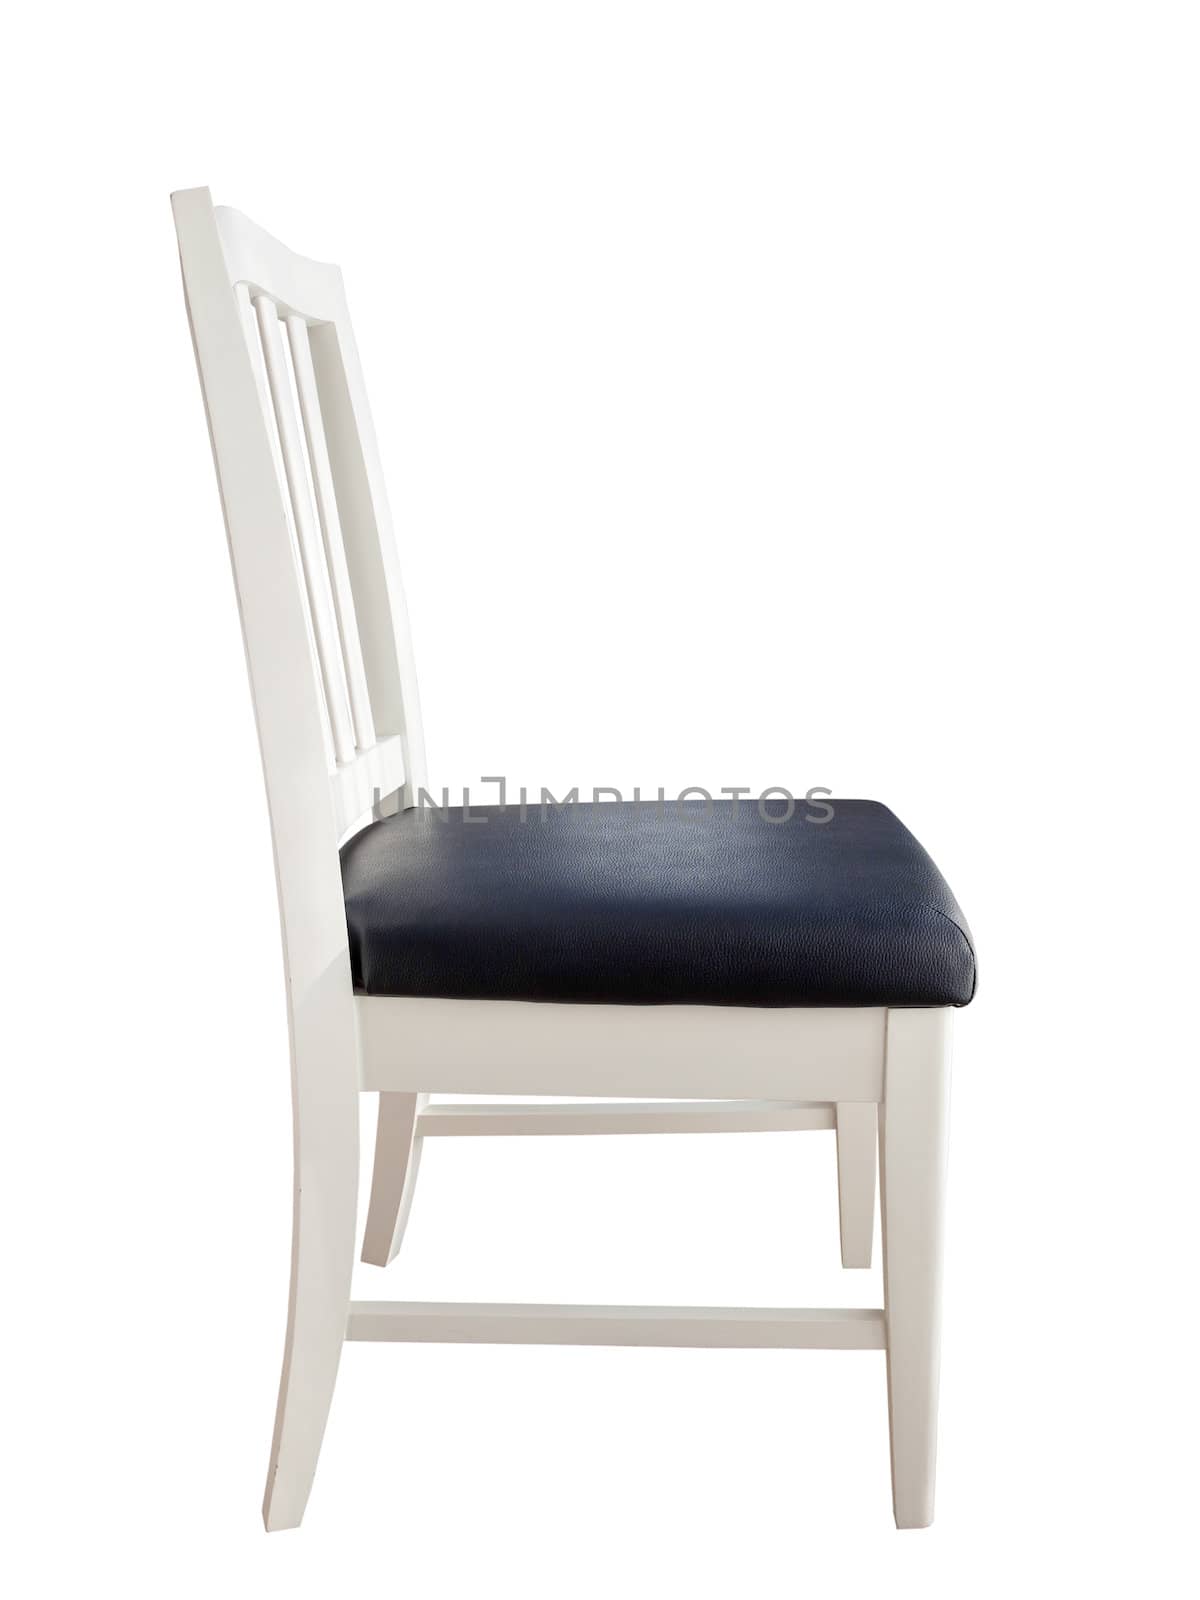 White chair isolated